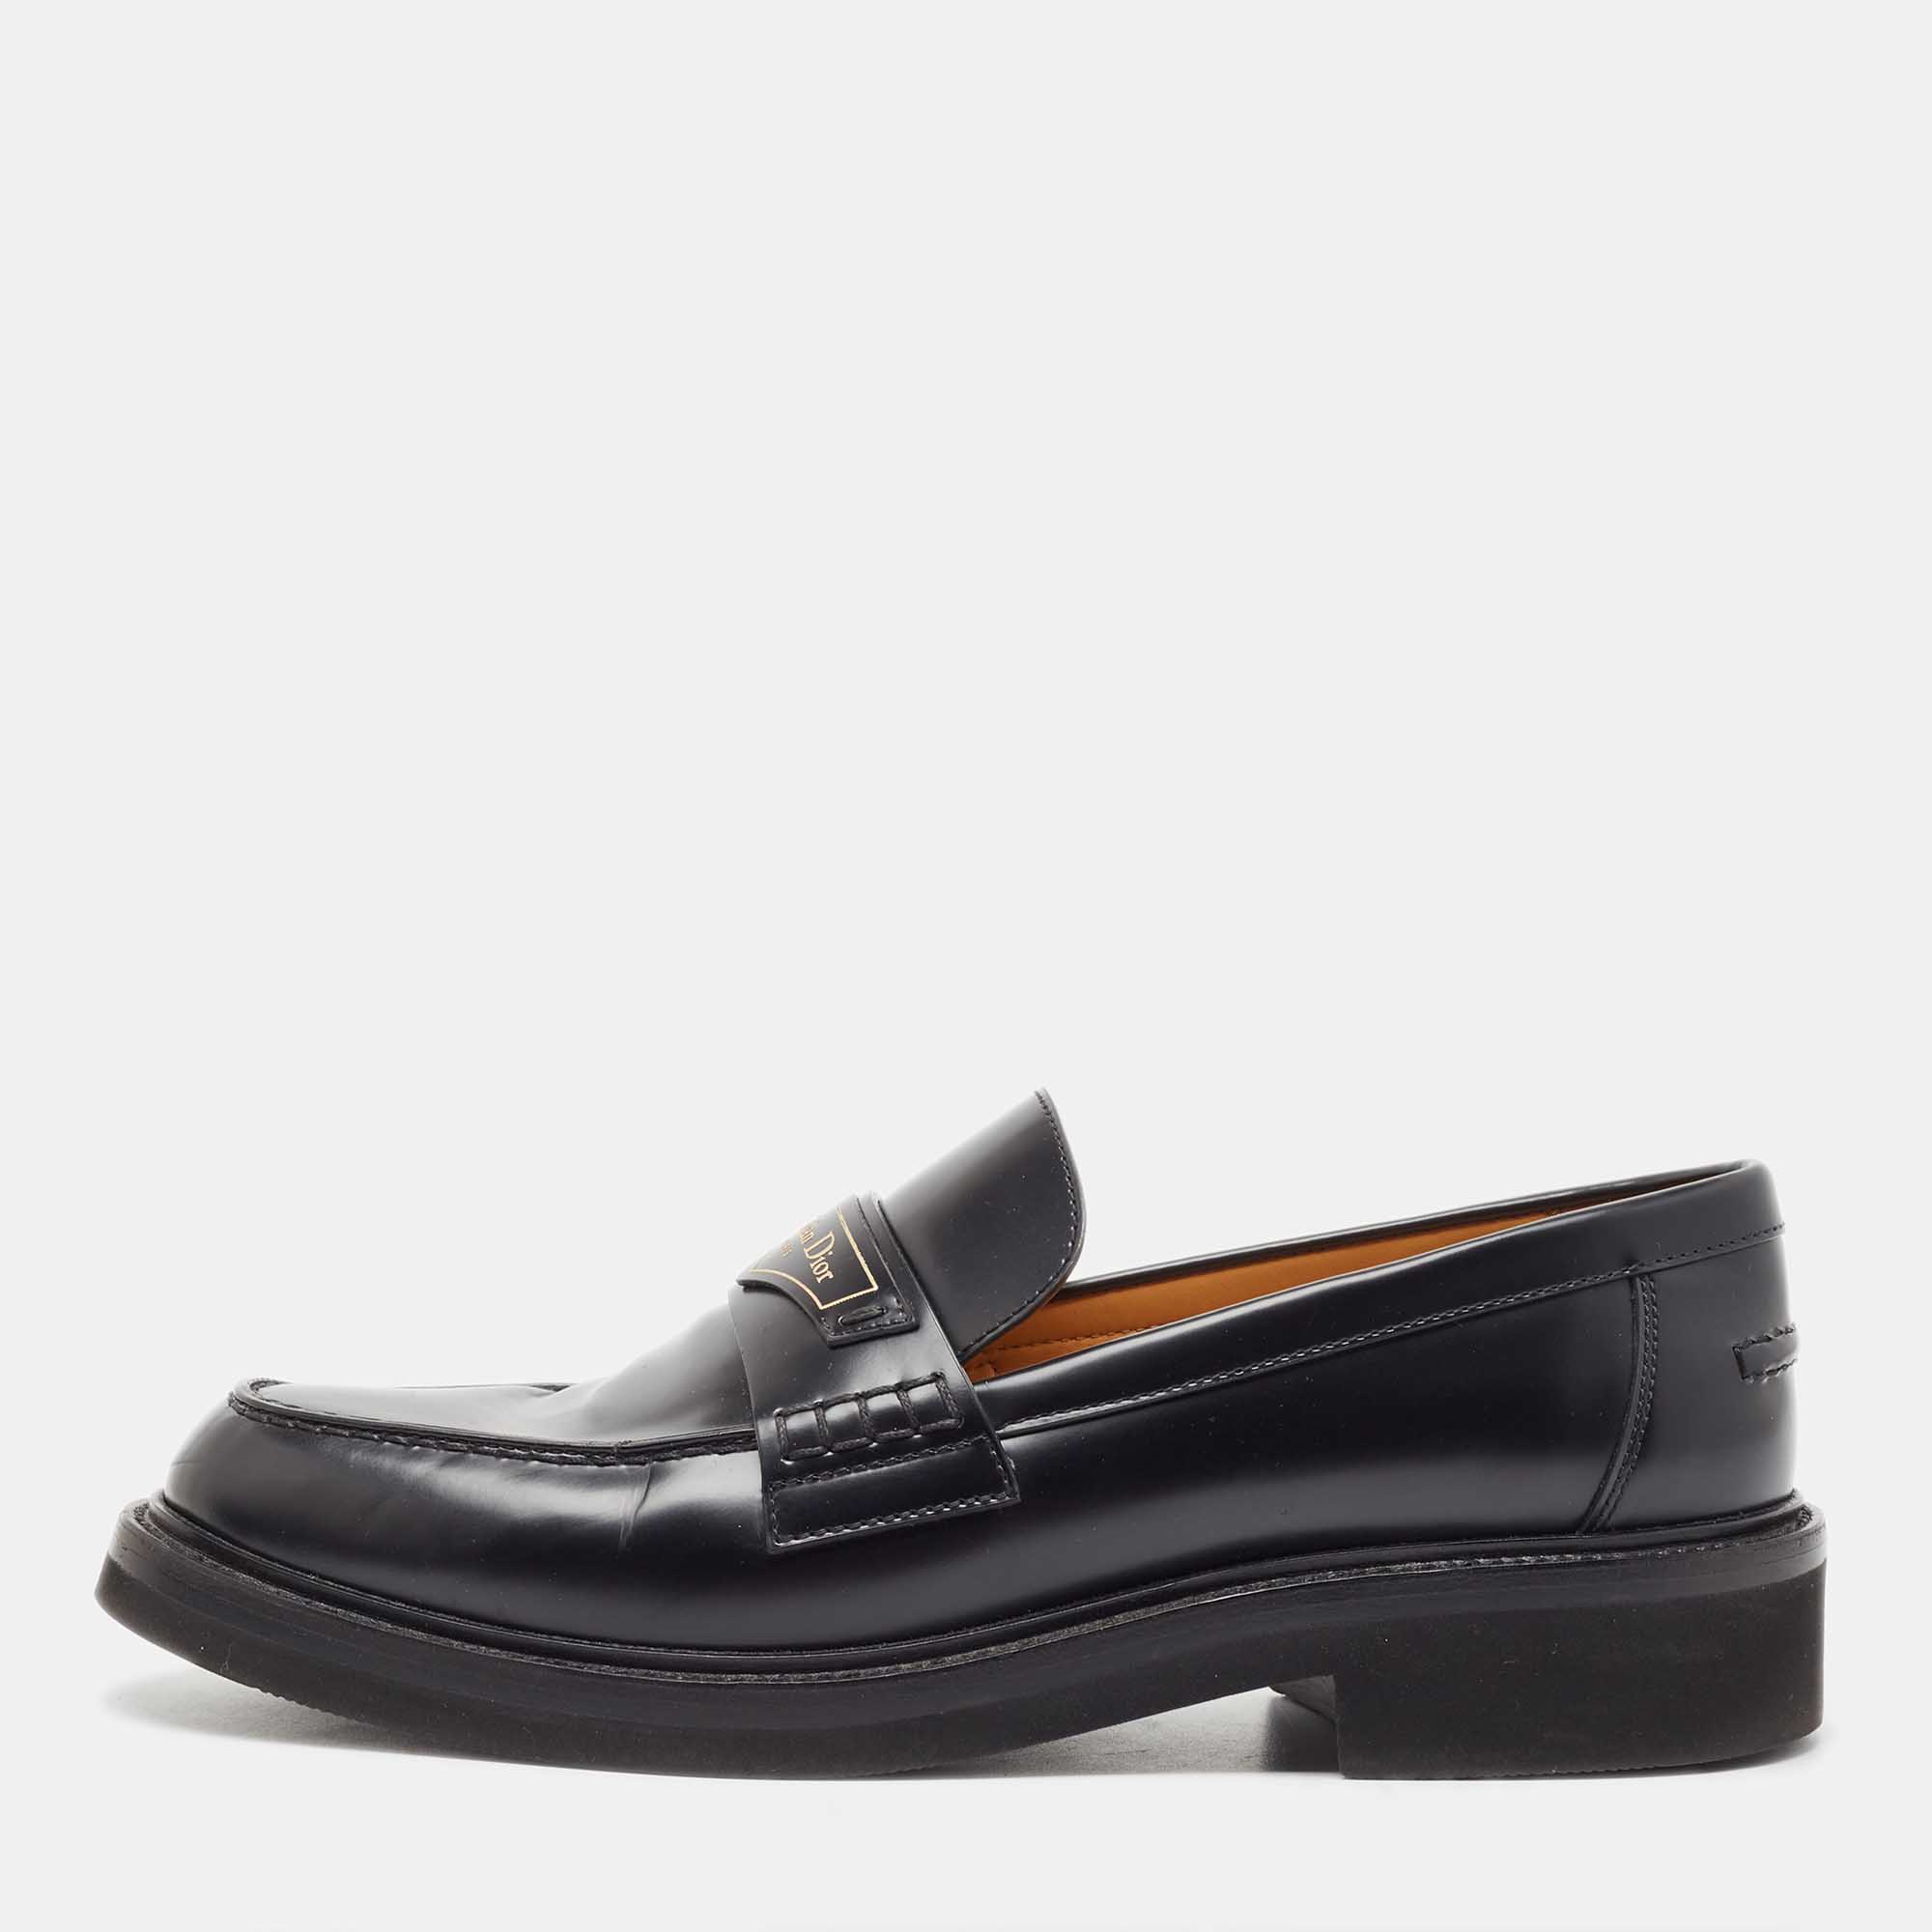 Pre-owned Dior Black Leather Boy Loafers Size 41